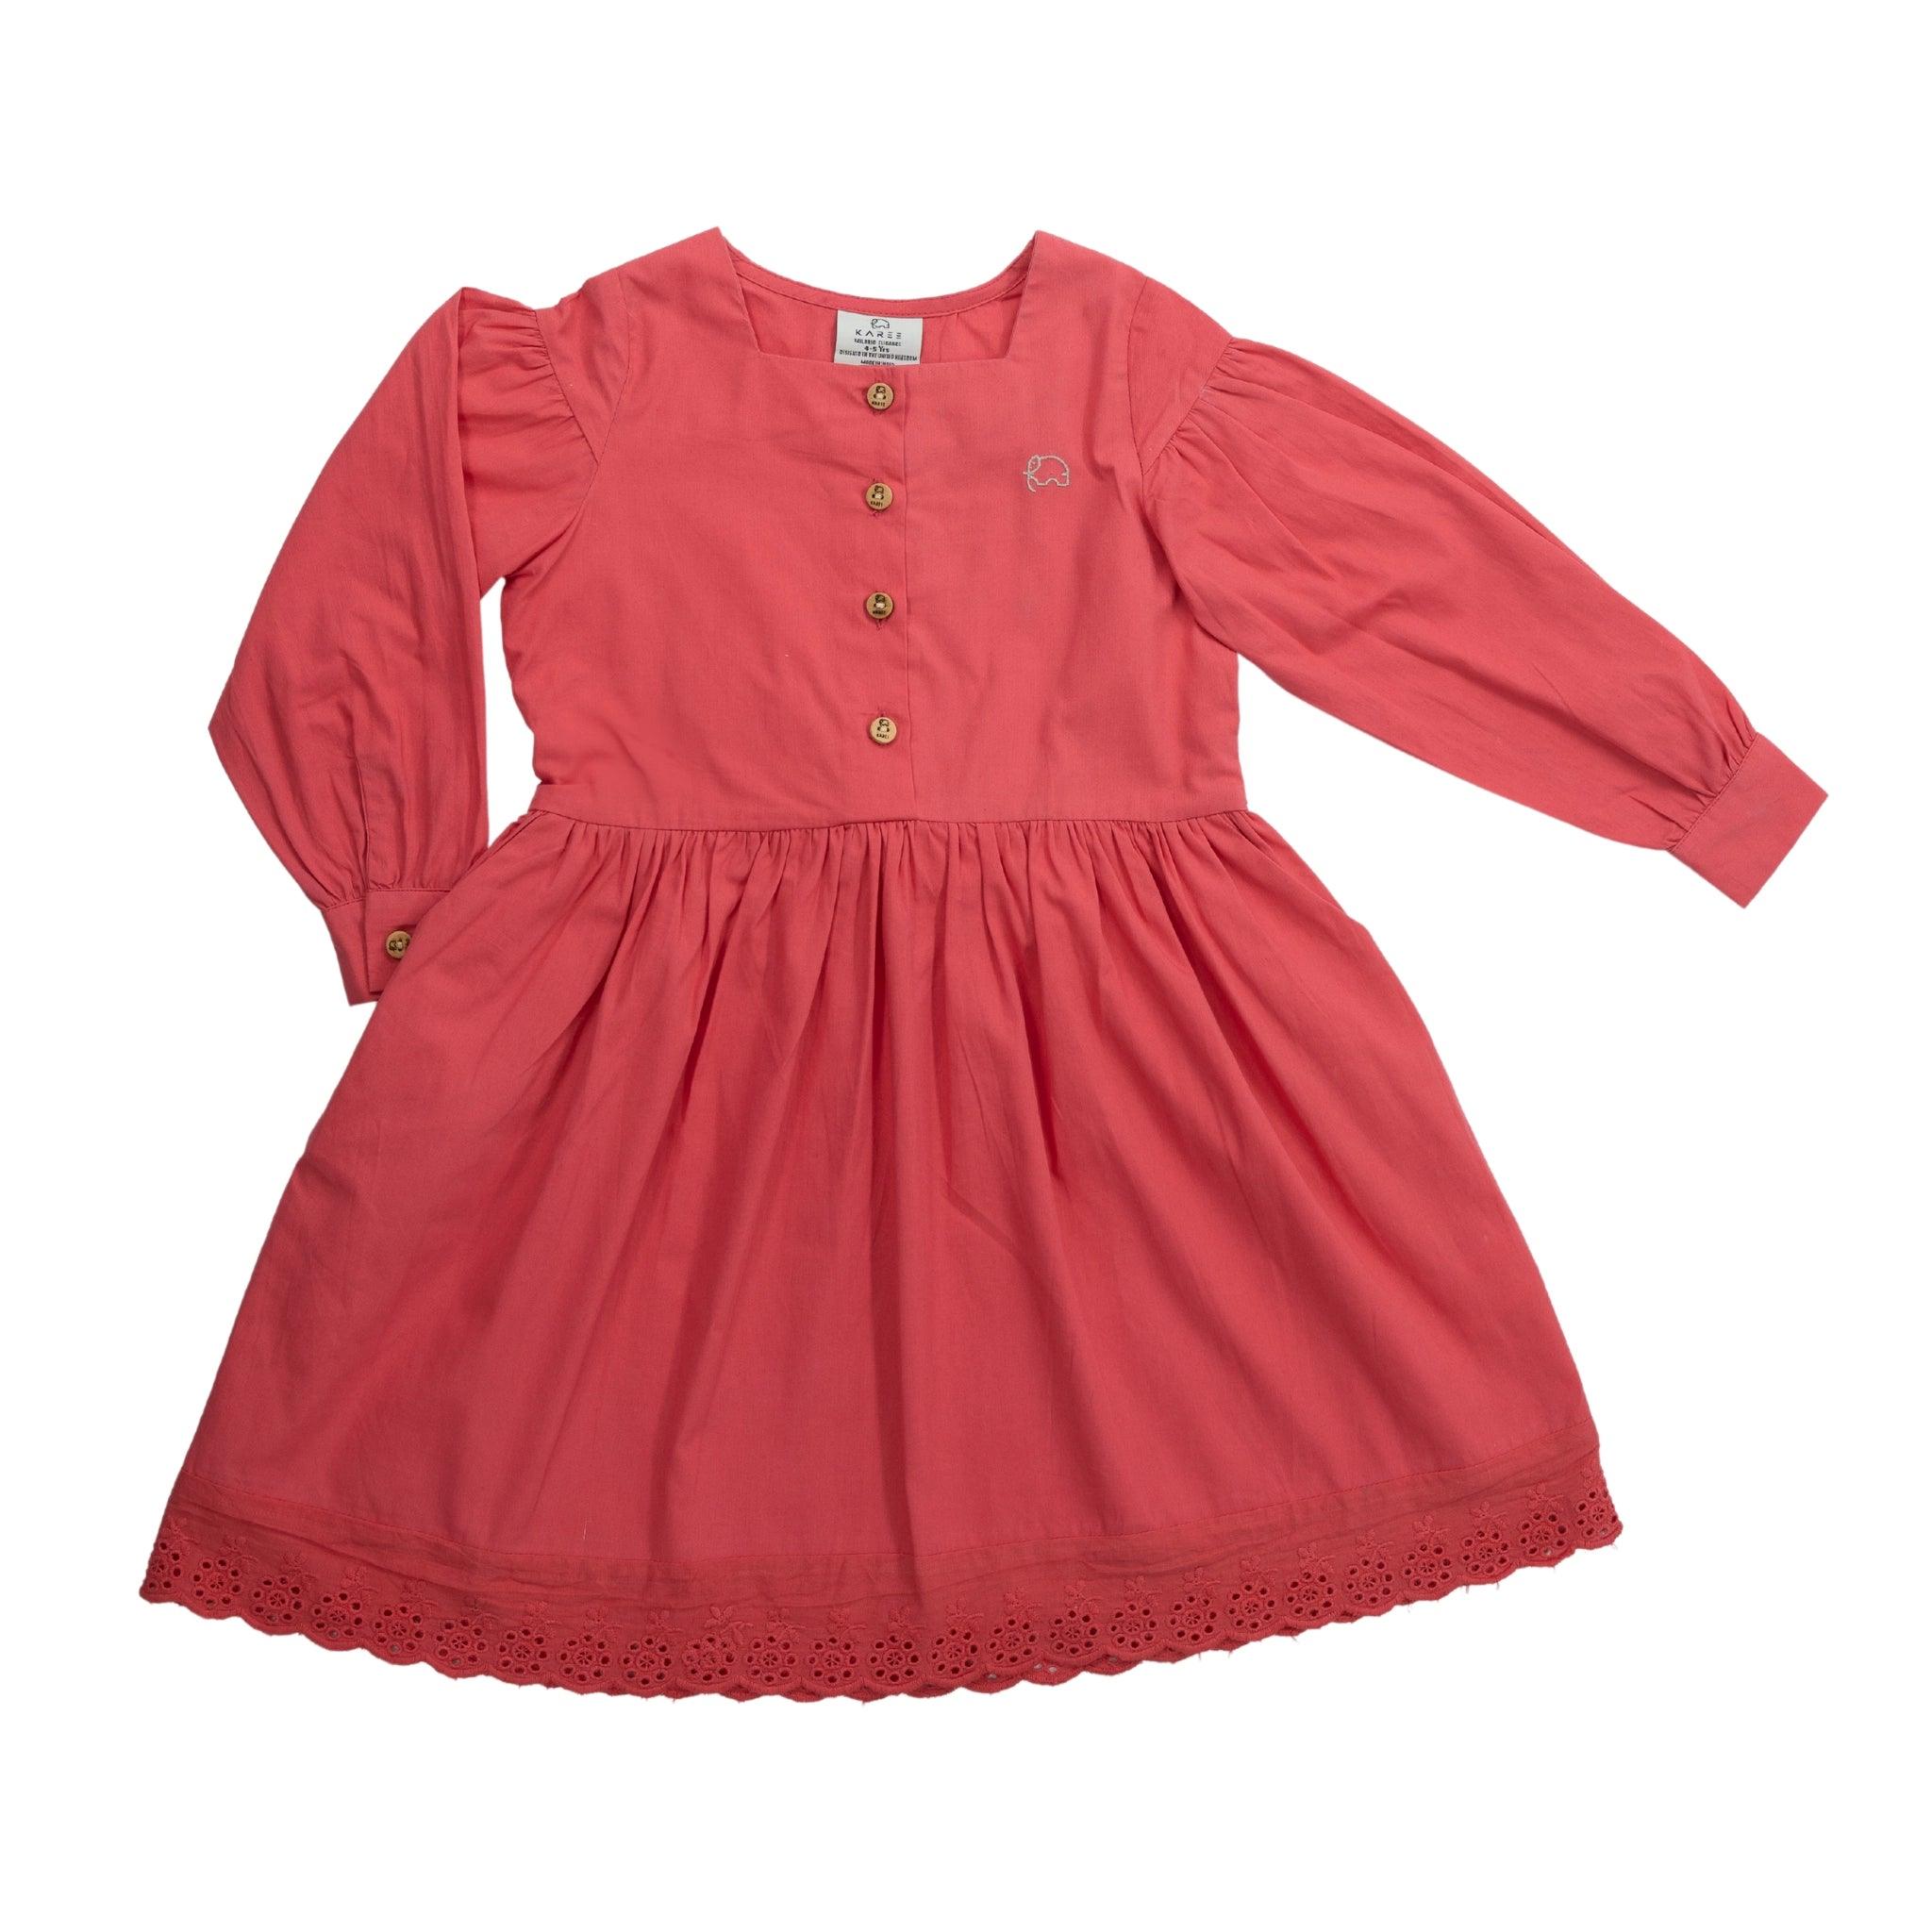 A red, eco-friendly long-sleeved dress for toddlers with button front and lace trim at the hem, displayed against a white background by Karee.